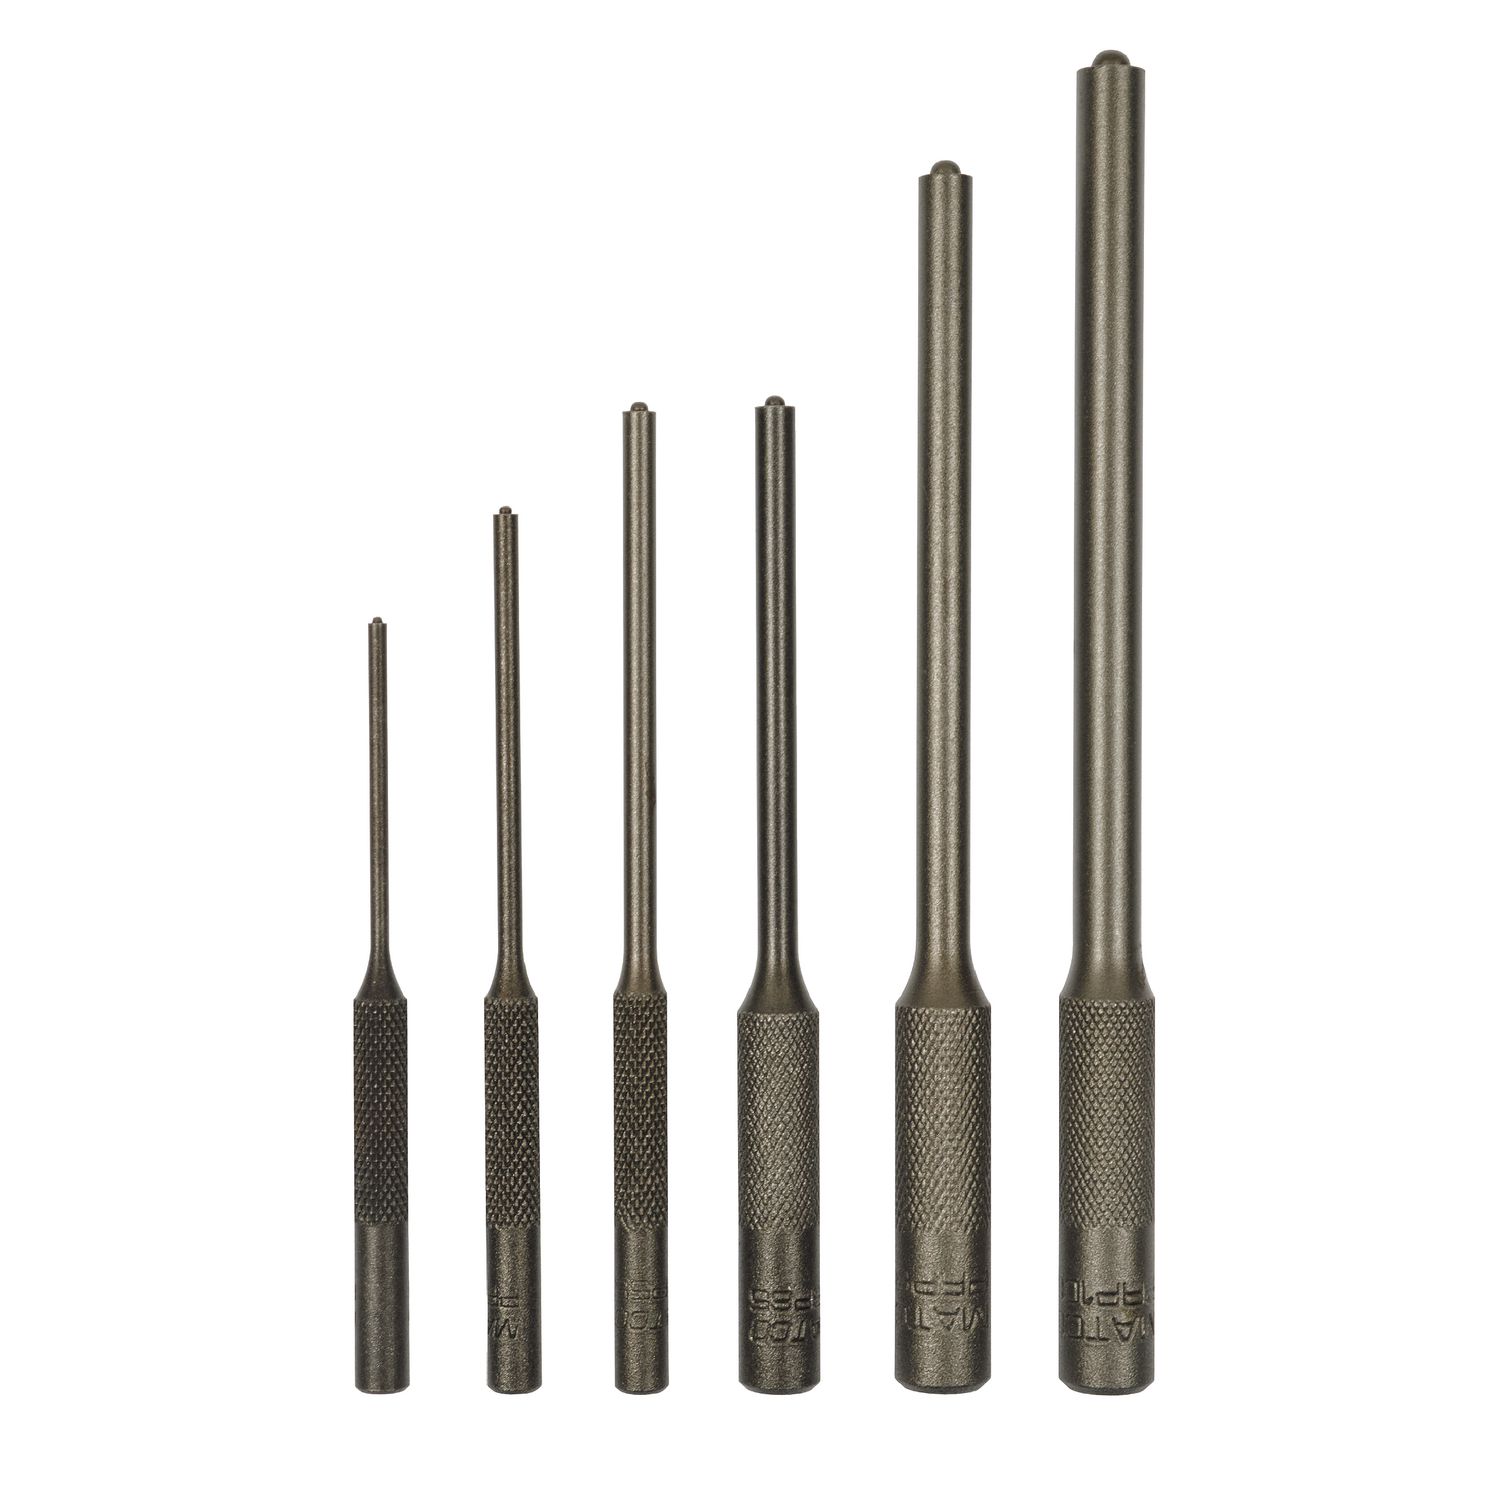 Bostitch 6-Piece Pin Punch Set at